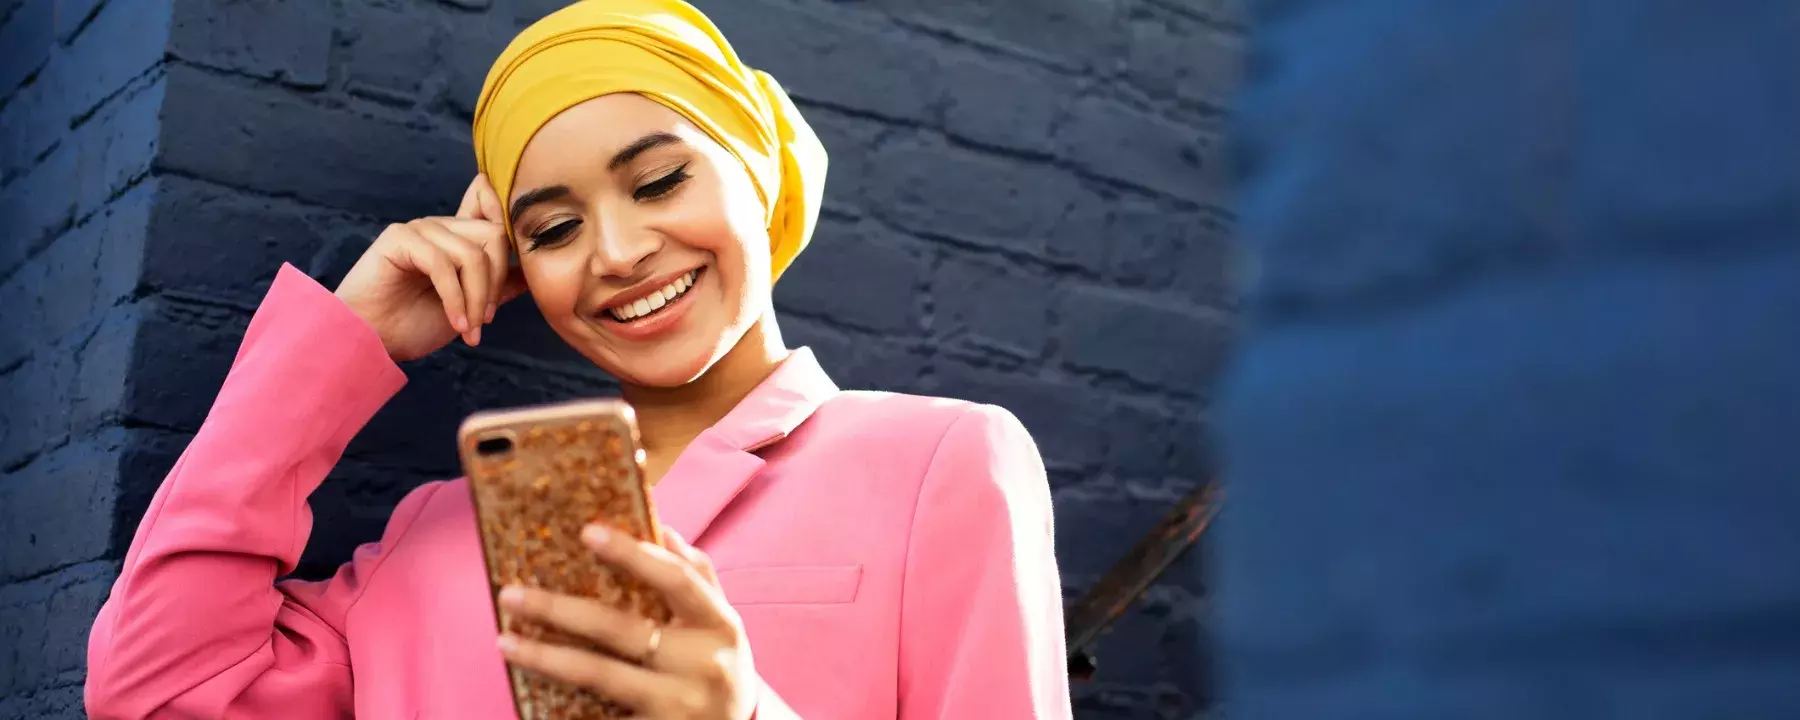 technology - young woman looking at phone - 1800*720